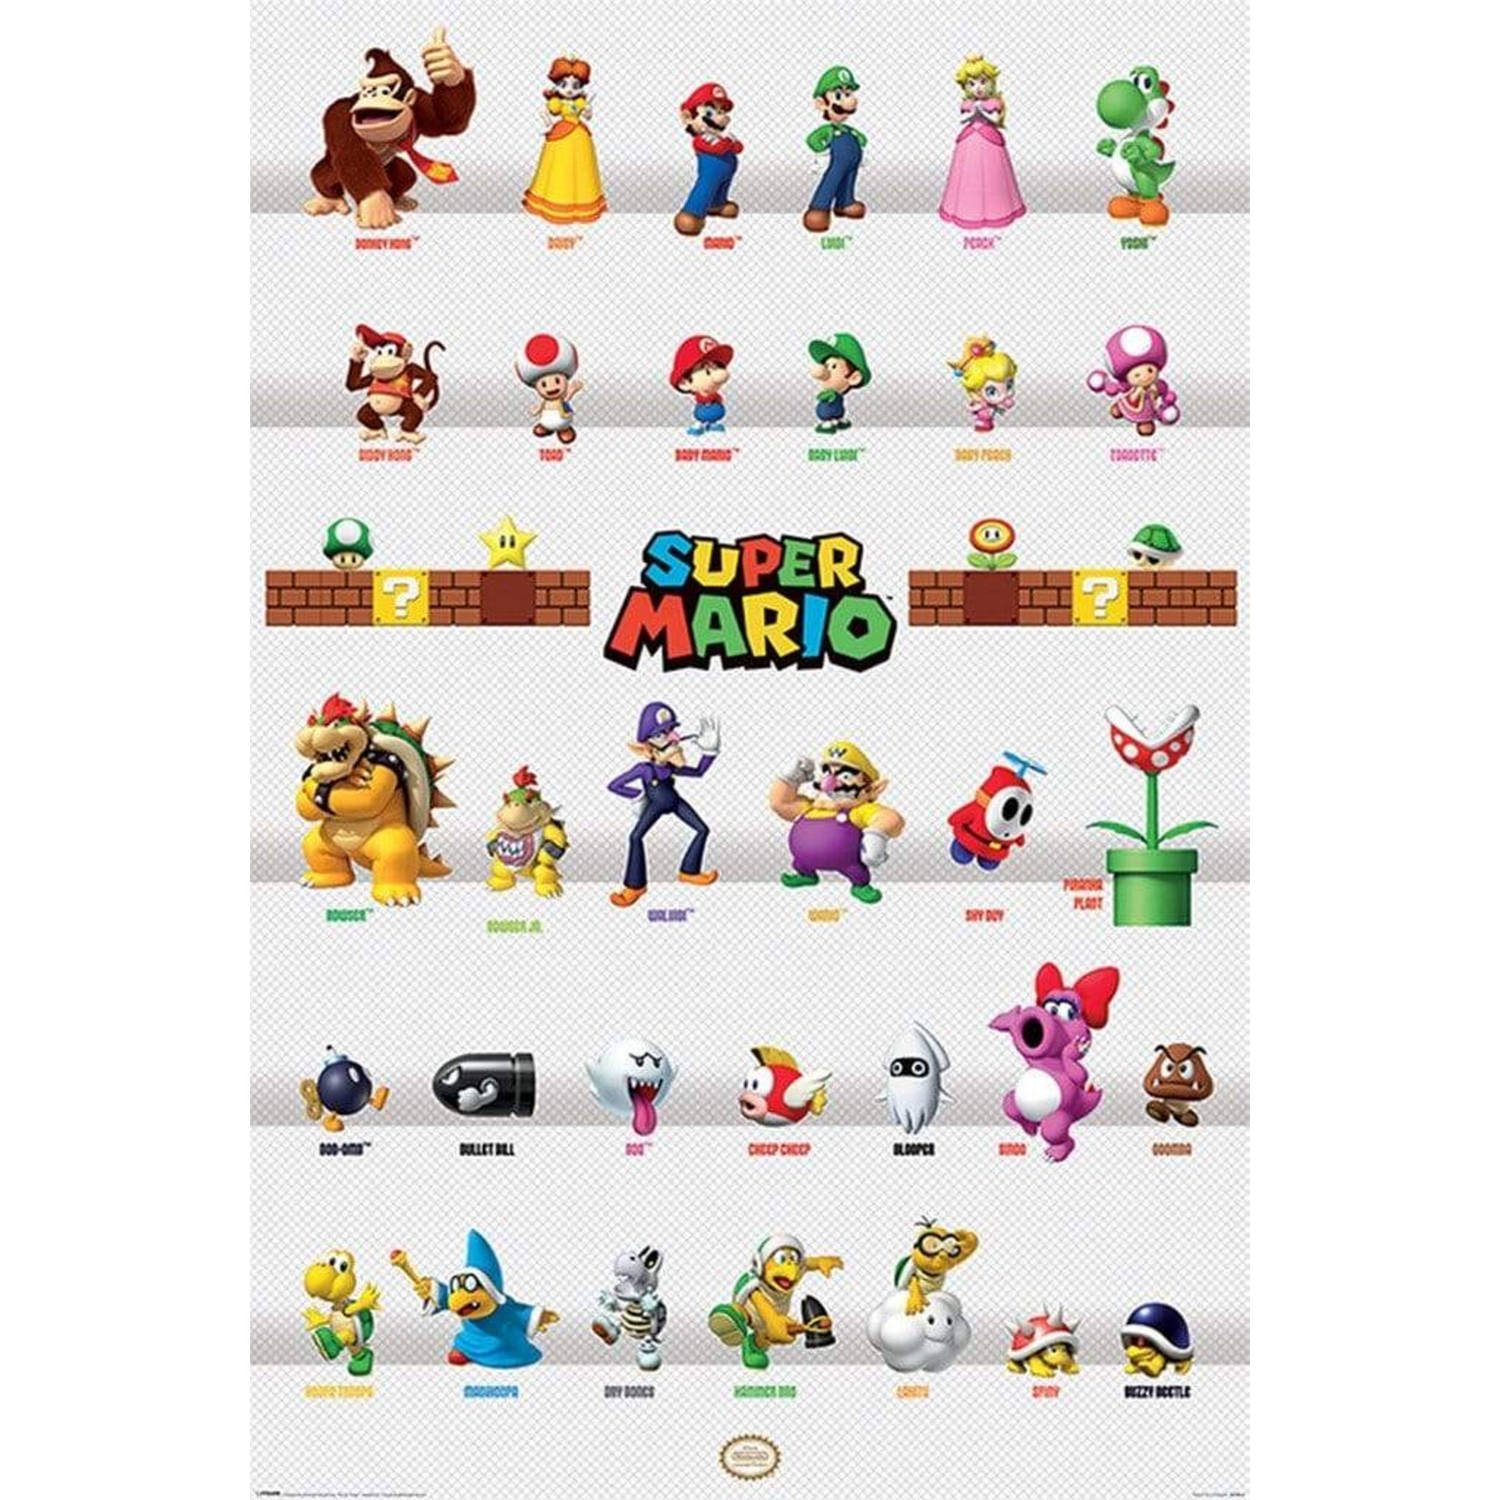 Super Mario Poster Pack Character Parade 61 x 91 cm (5)